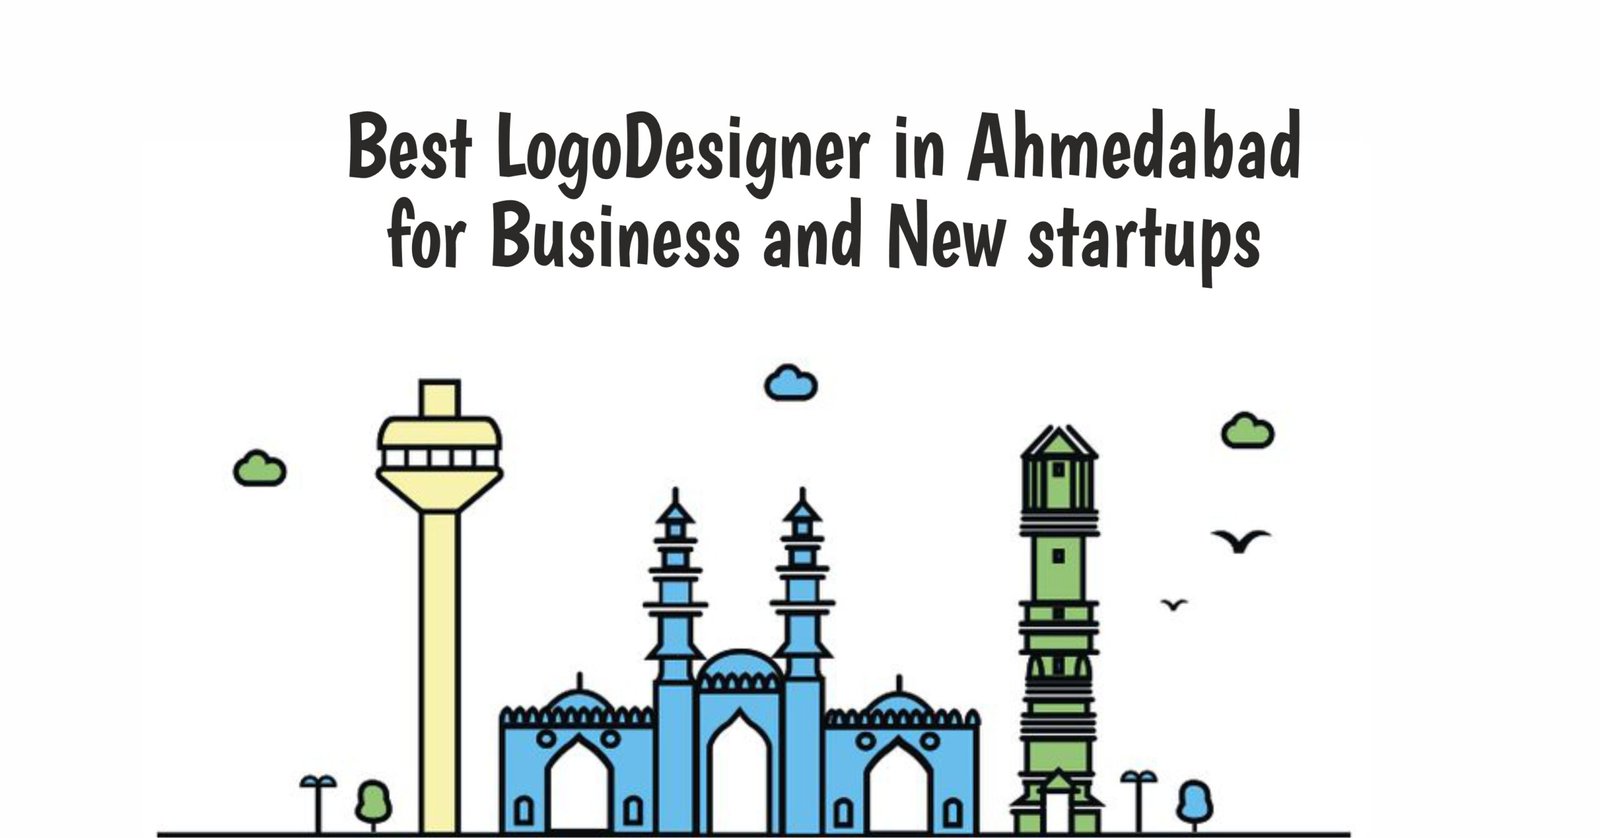 Best LogoDesigner in Ahmedabad for Business and New startups